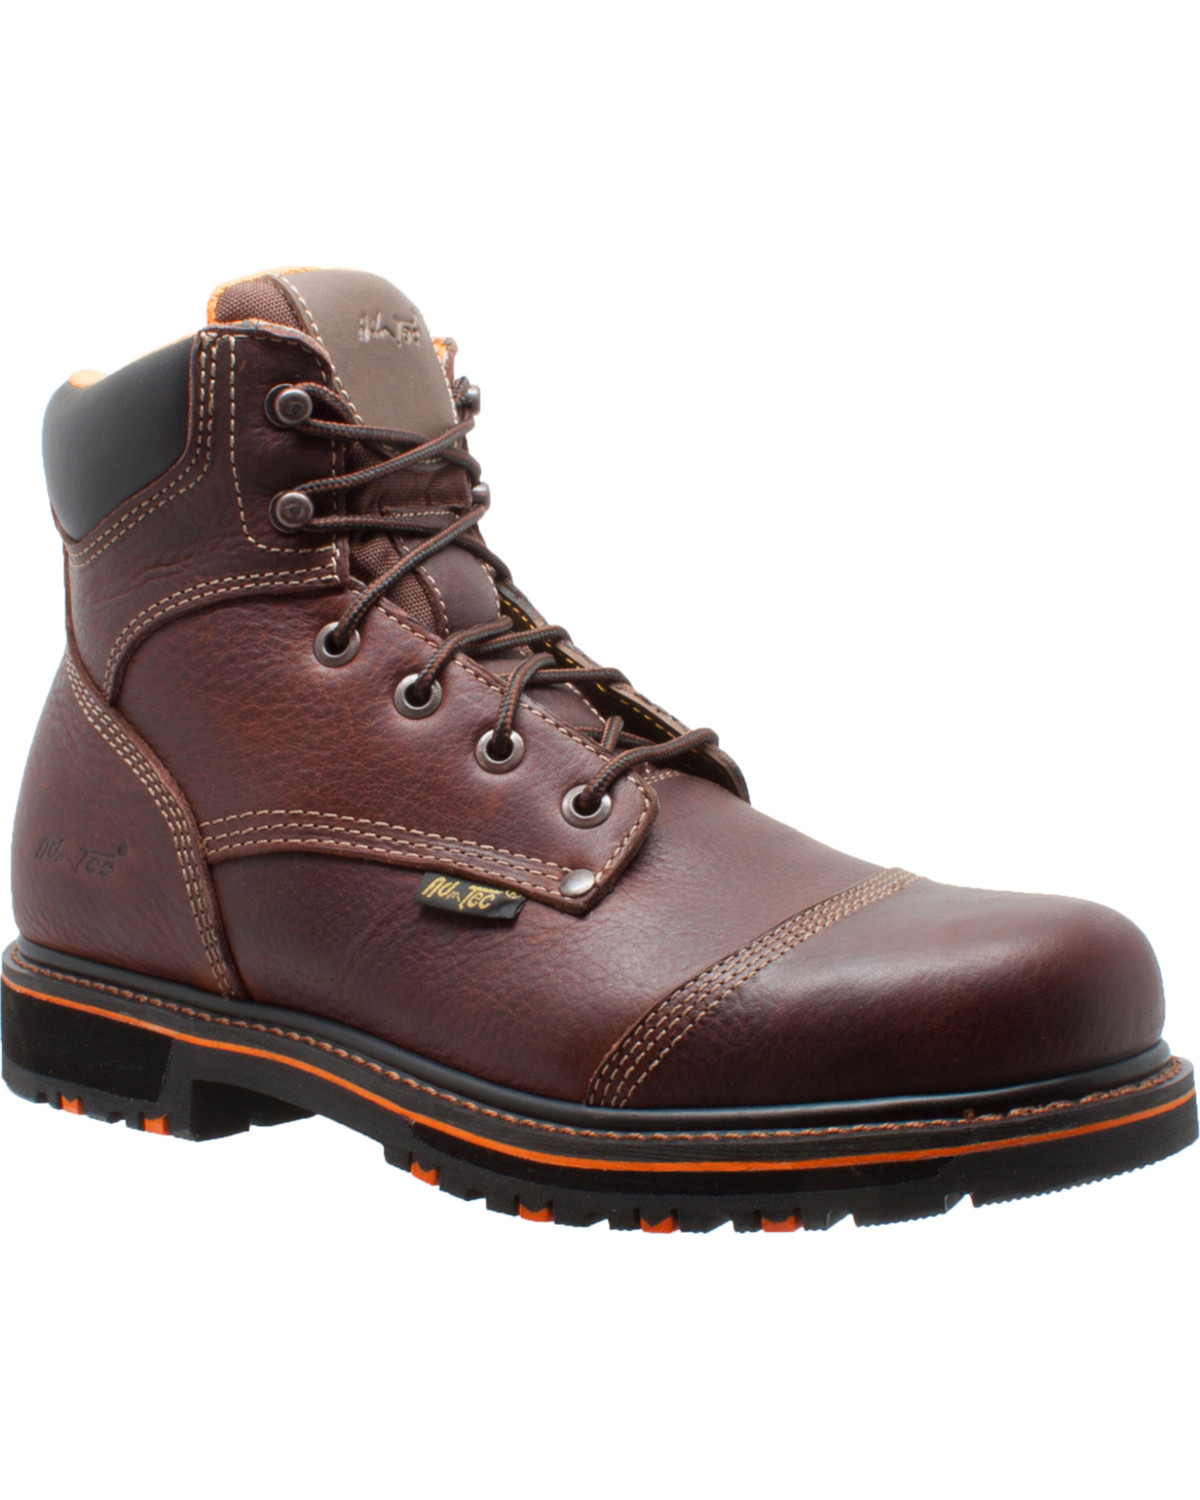 Brown, Numeric_10_Point_5 Ad Tec Mens 6 Tumbled Leather Comfort Work Boot Soft Toe 